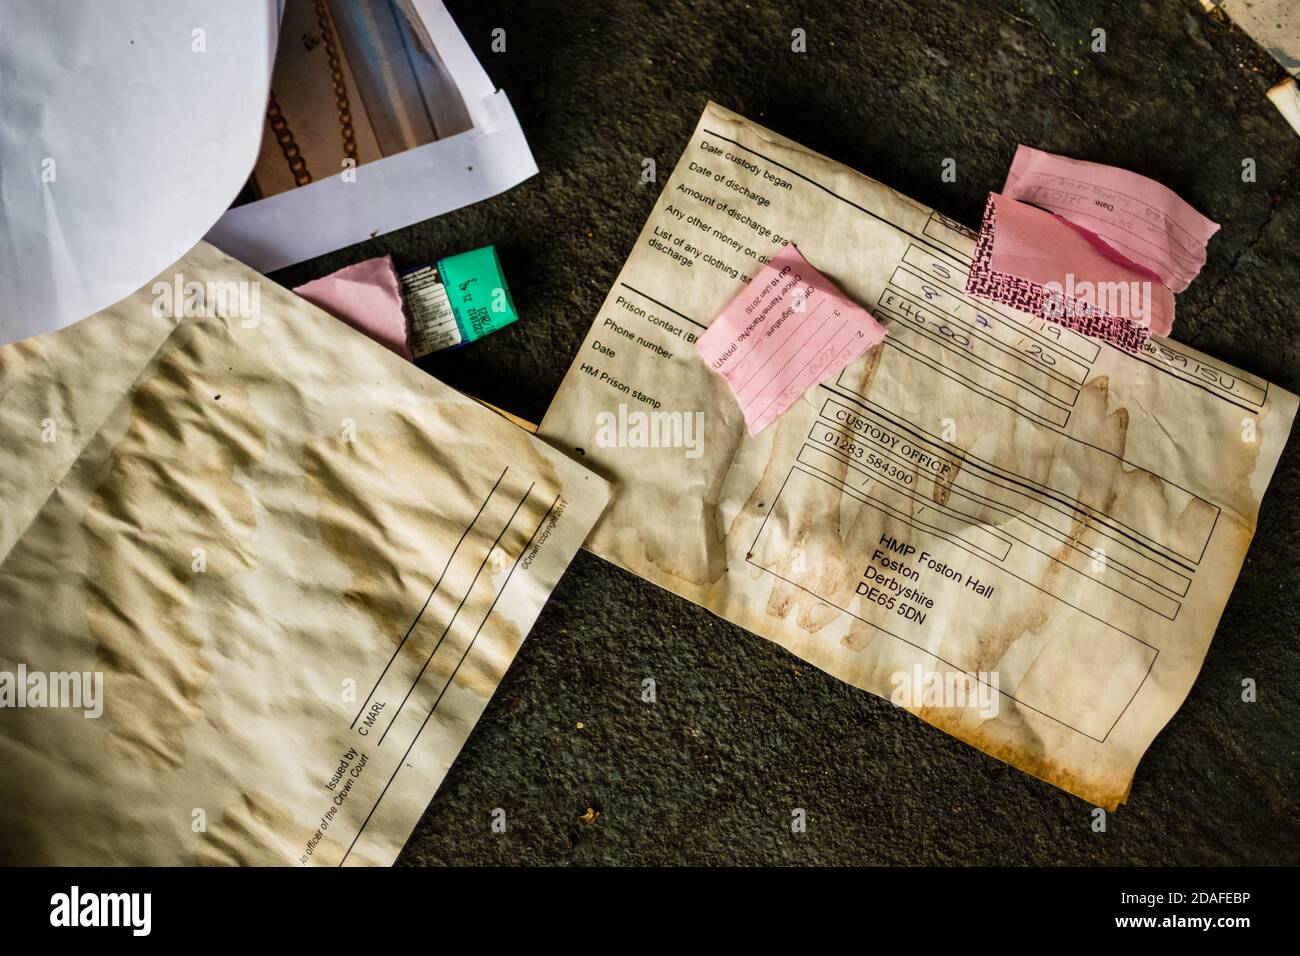 Personal legal documents of an ex-prisoner found discarded outside Hallam University students' Union Stock Photo